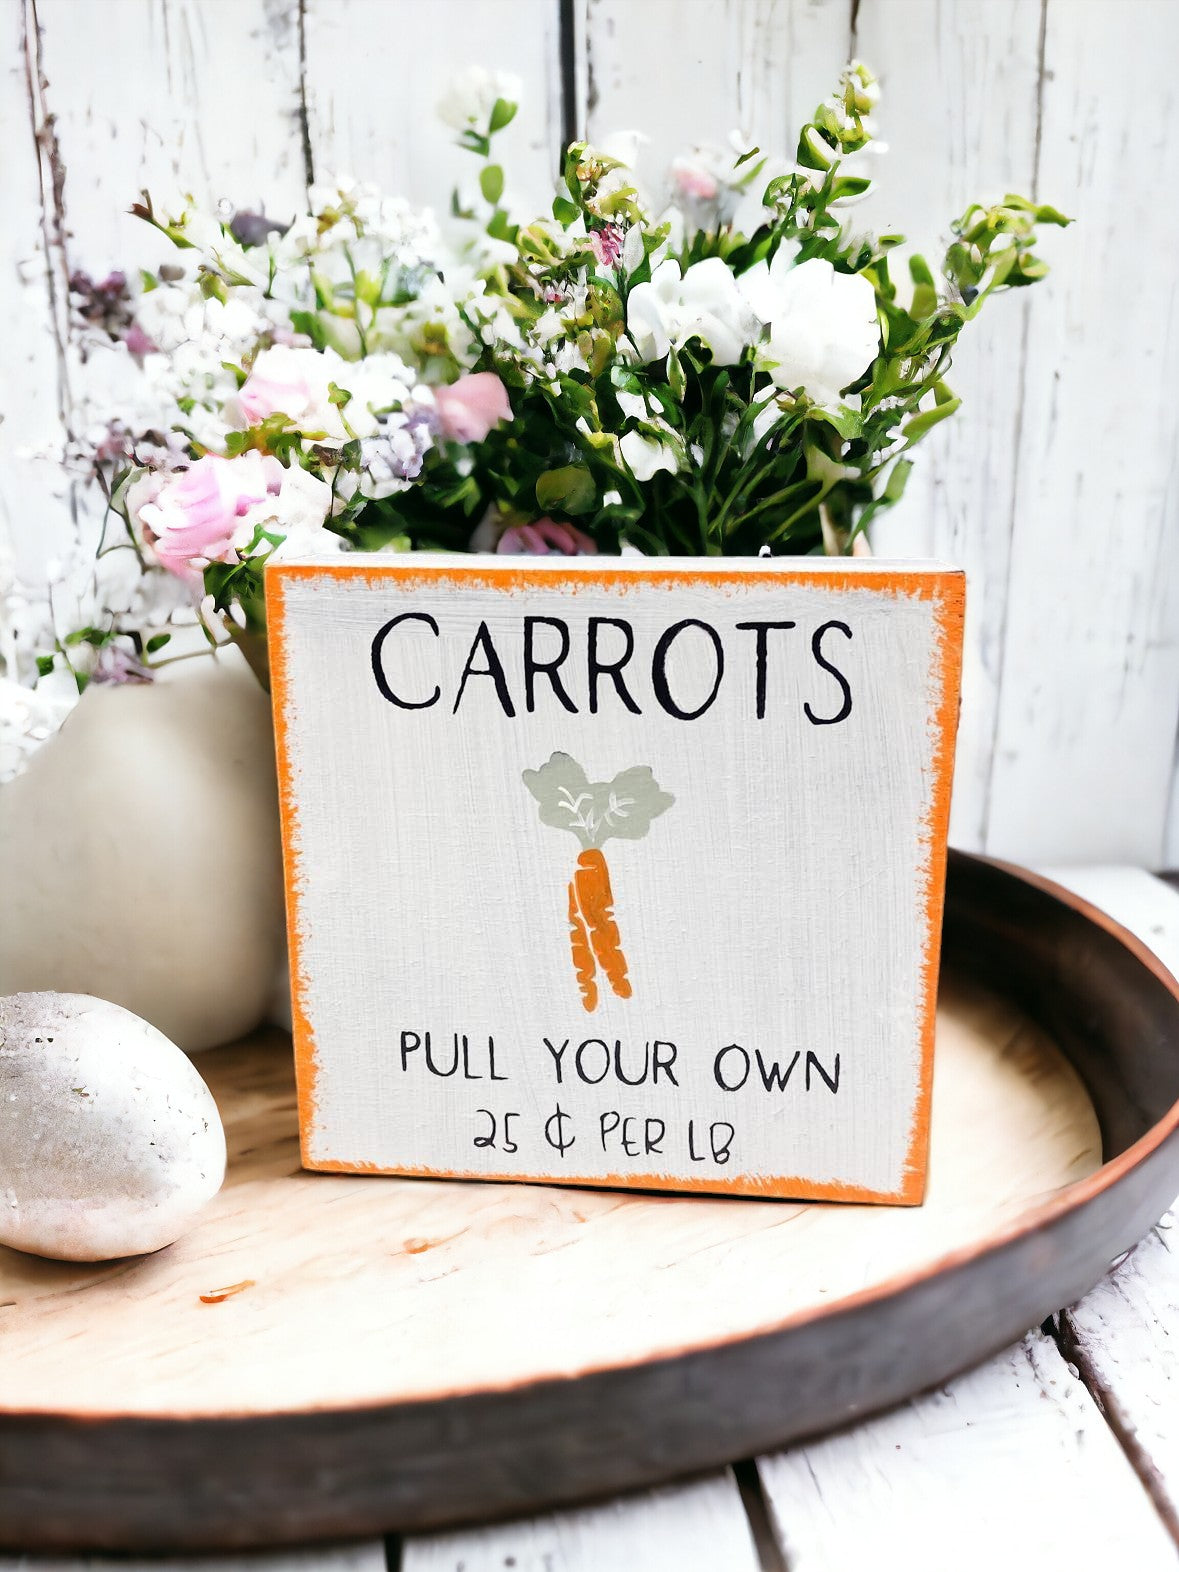 "Carrots Pull Your Own 25¢ per lb." wooden Easter sign with hand-painted carrot design on a white background.